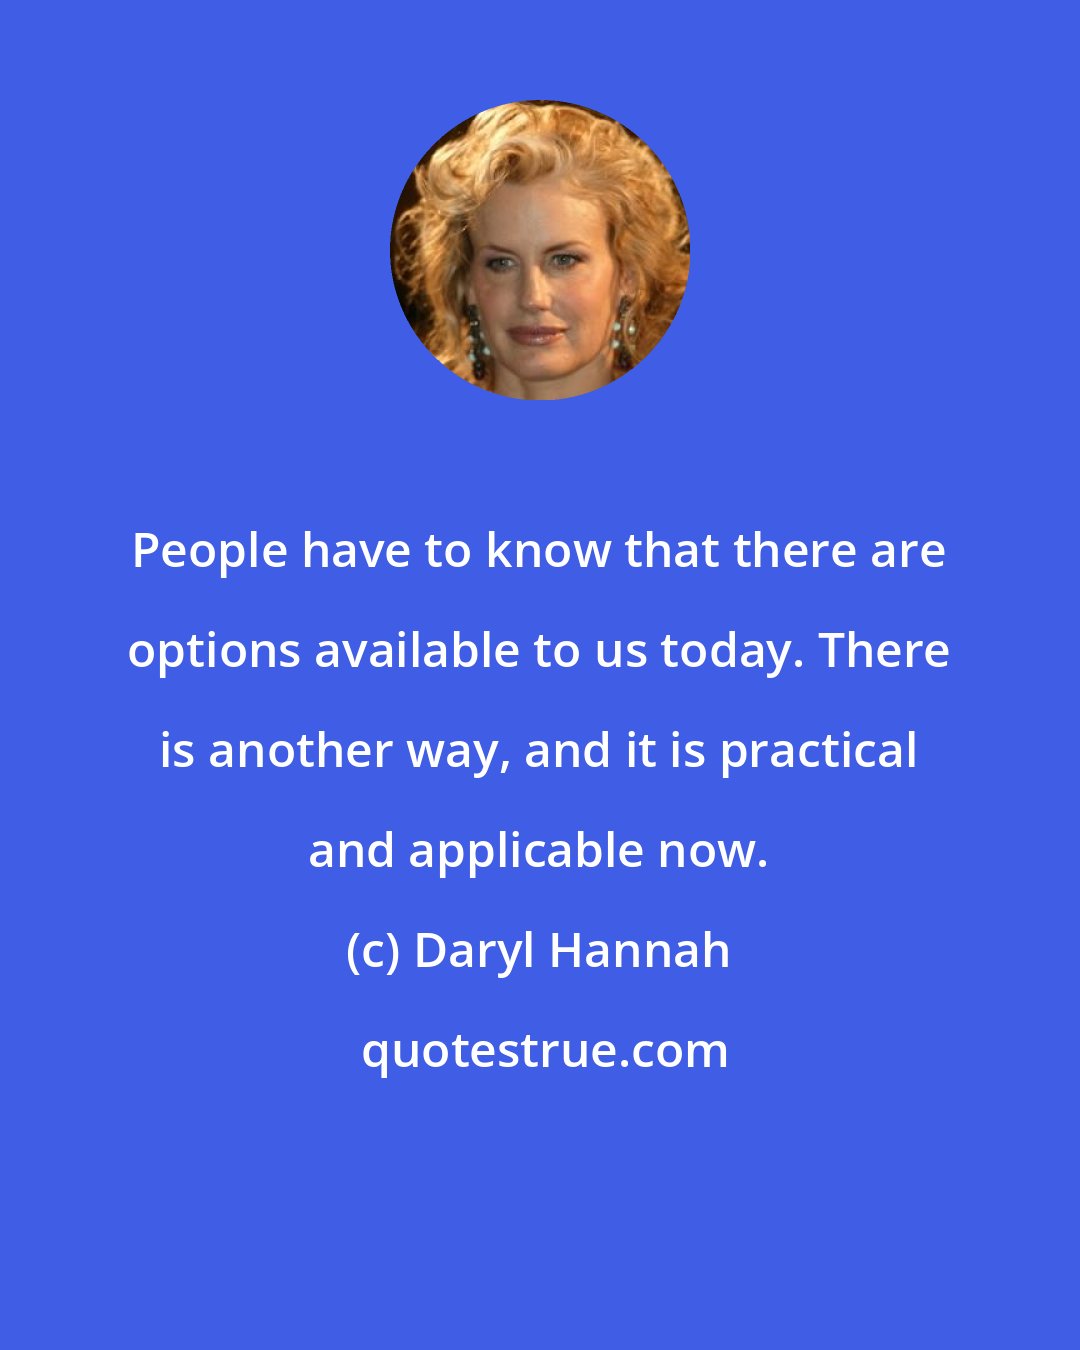 Daryl Hannah: People have to know that there are options available to us today. There is another way, and it is practical and applicable now.